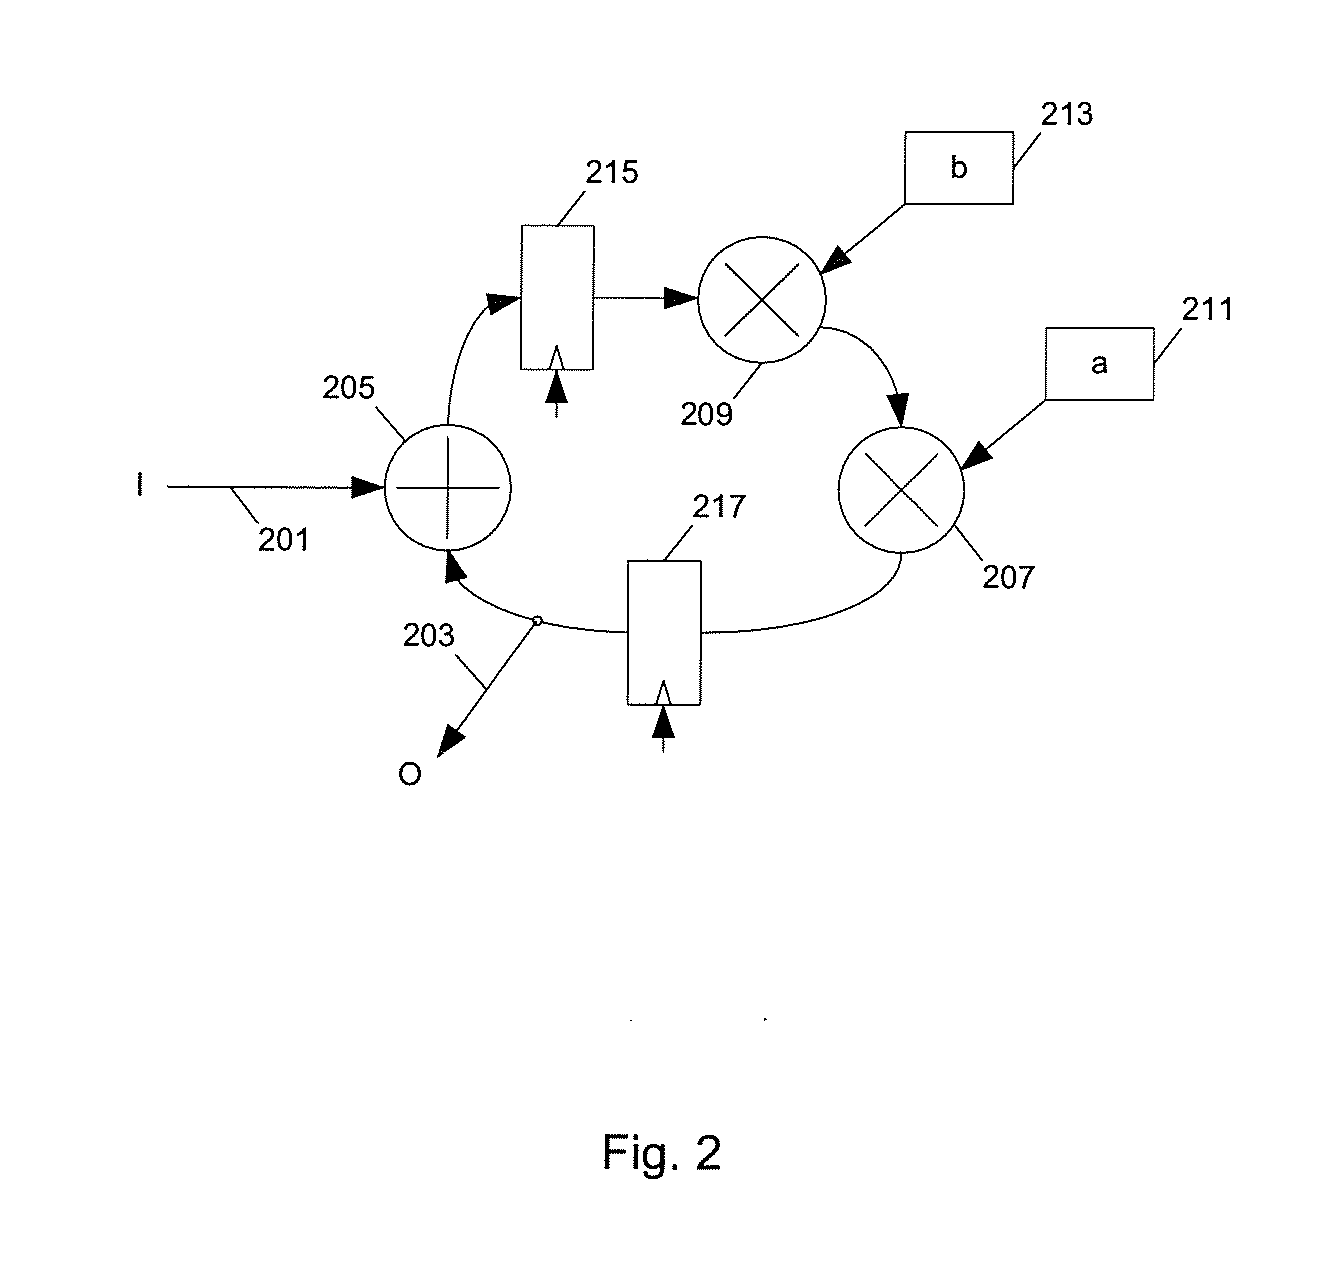 Method and apparatus for improving the interconnection and multiplexing cost of circuit design from high level synthesis using ant colony optimization